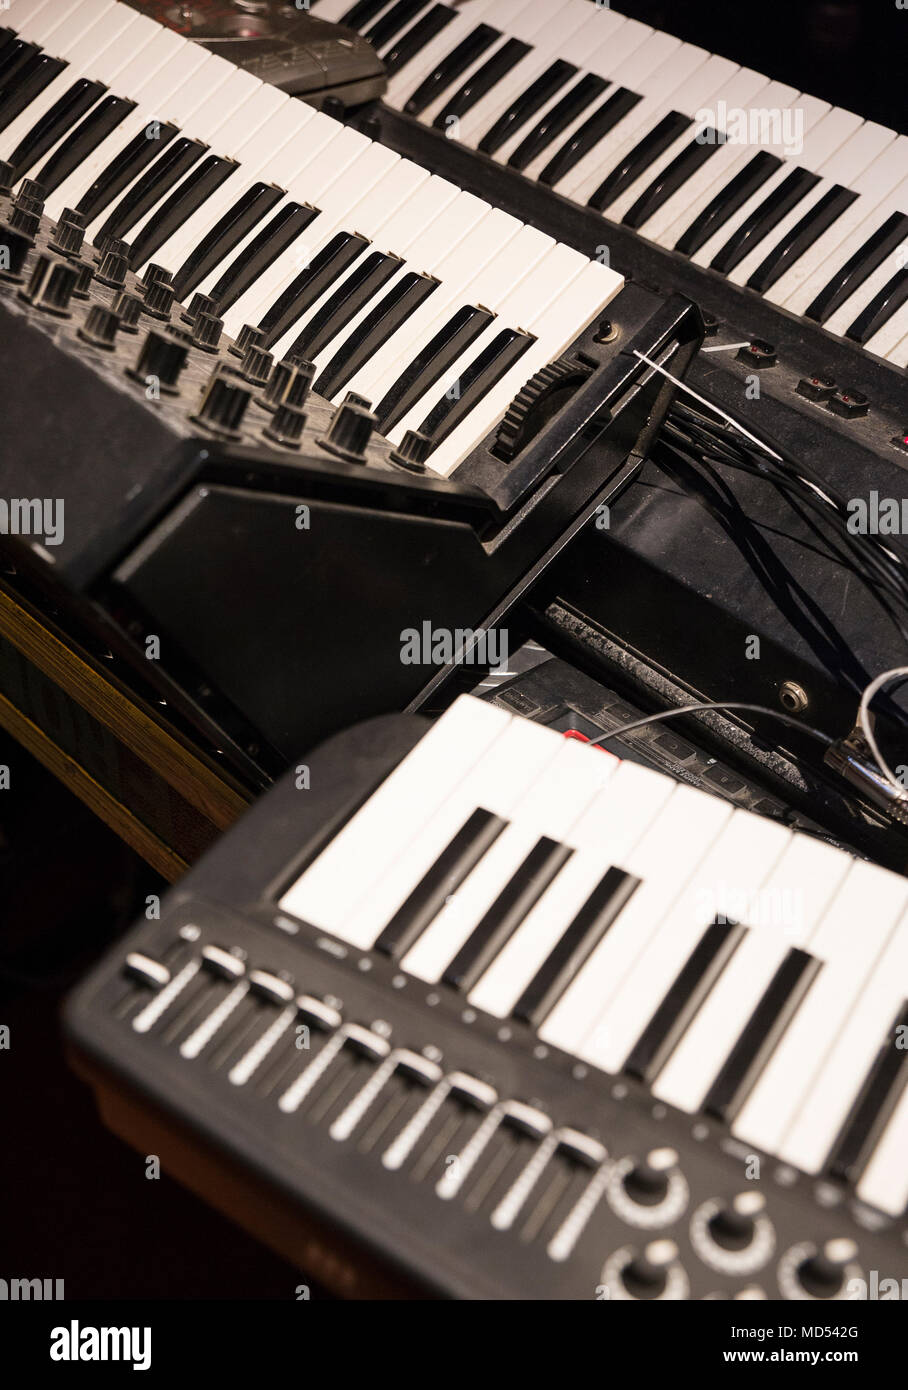 Old synthesizers used to make electronic music Stock Photo